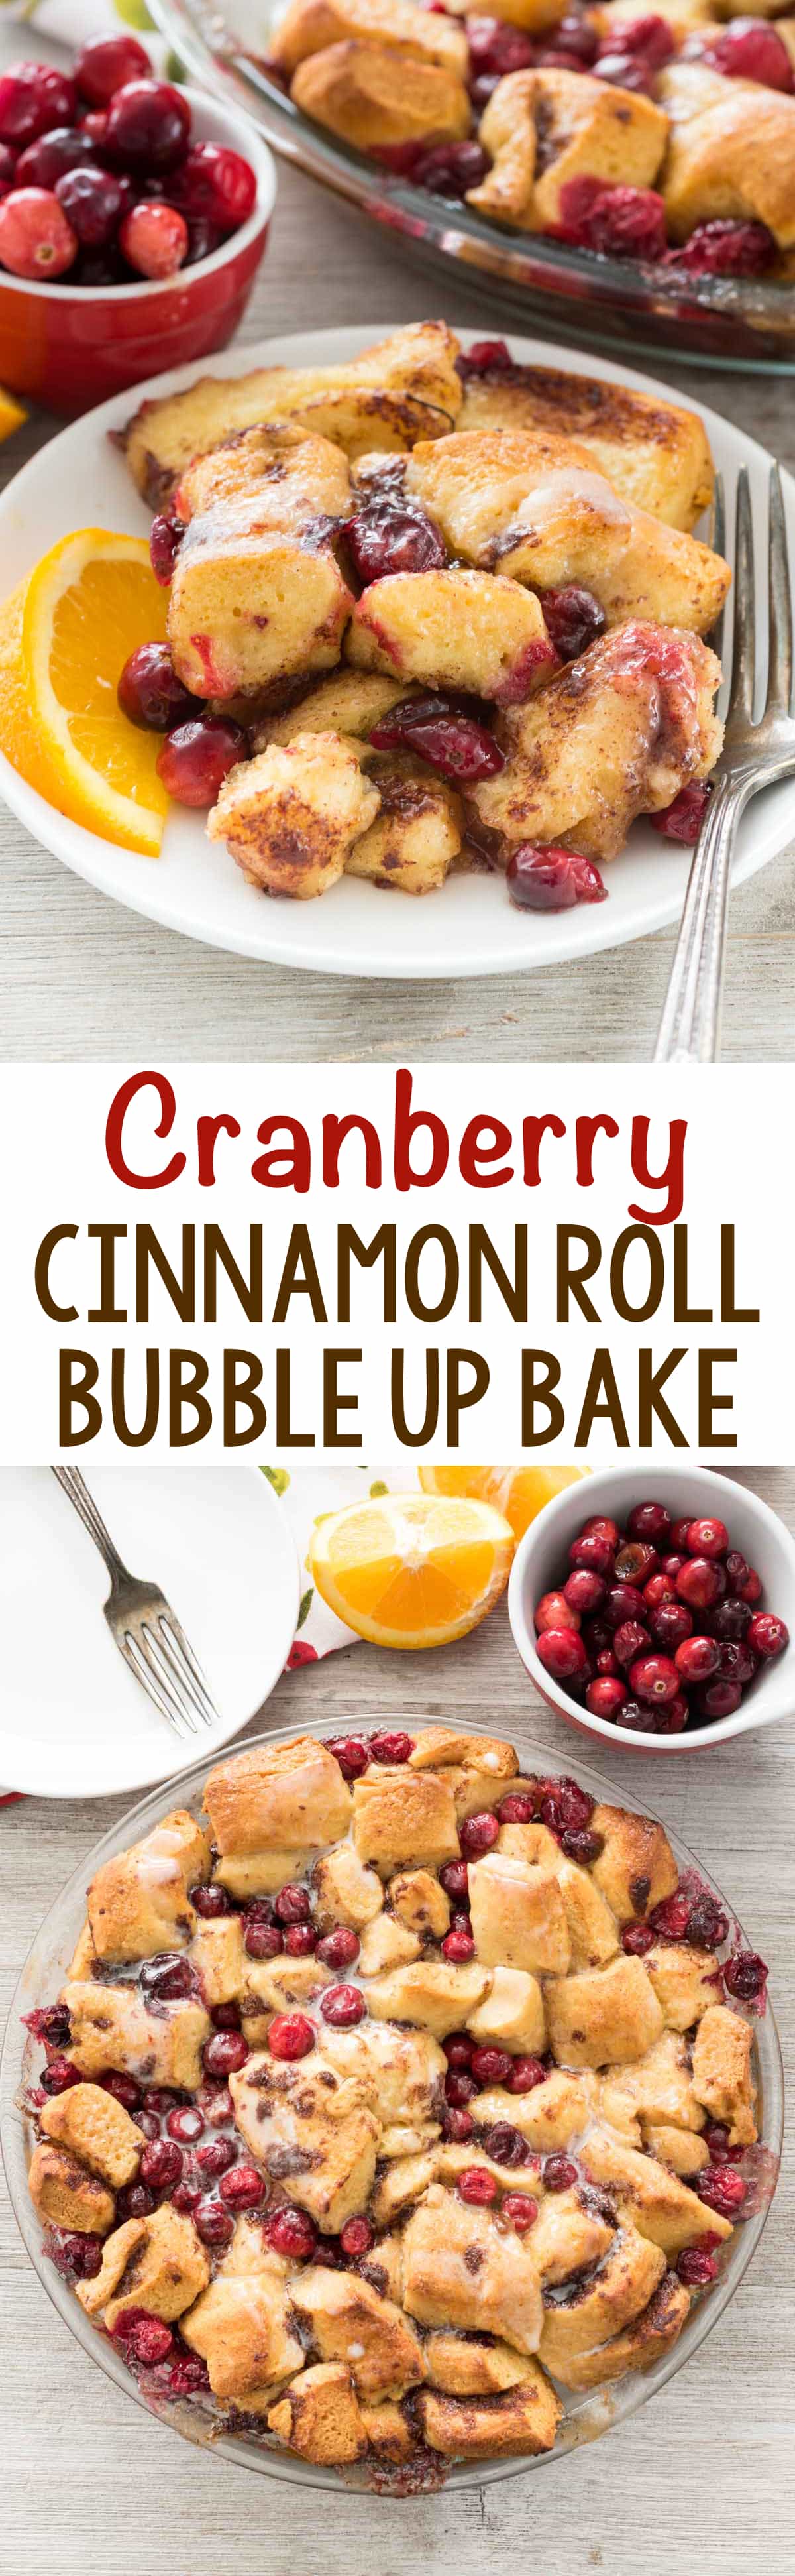 Cranberry Cinnamon Roll Bake - this easy bubble up bake recipe starts with cinnamon rolls. Add fresh cranberries for a holiday breakfast!